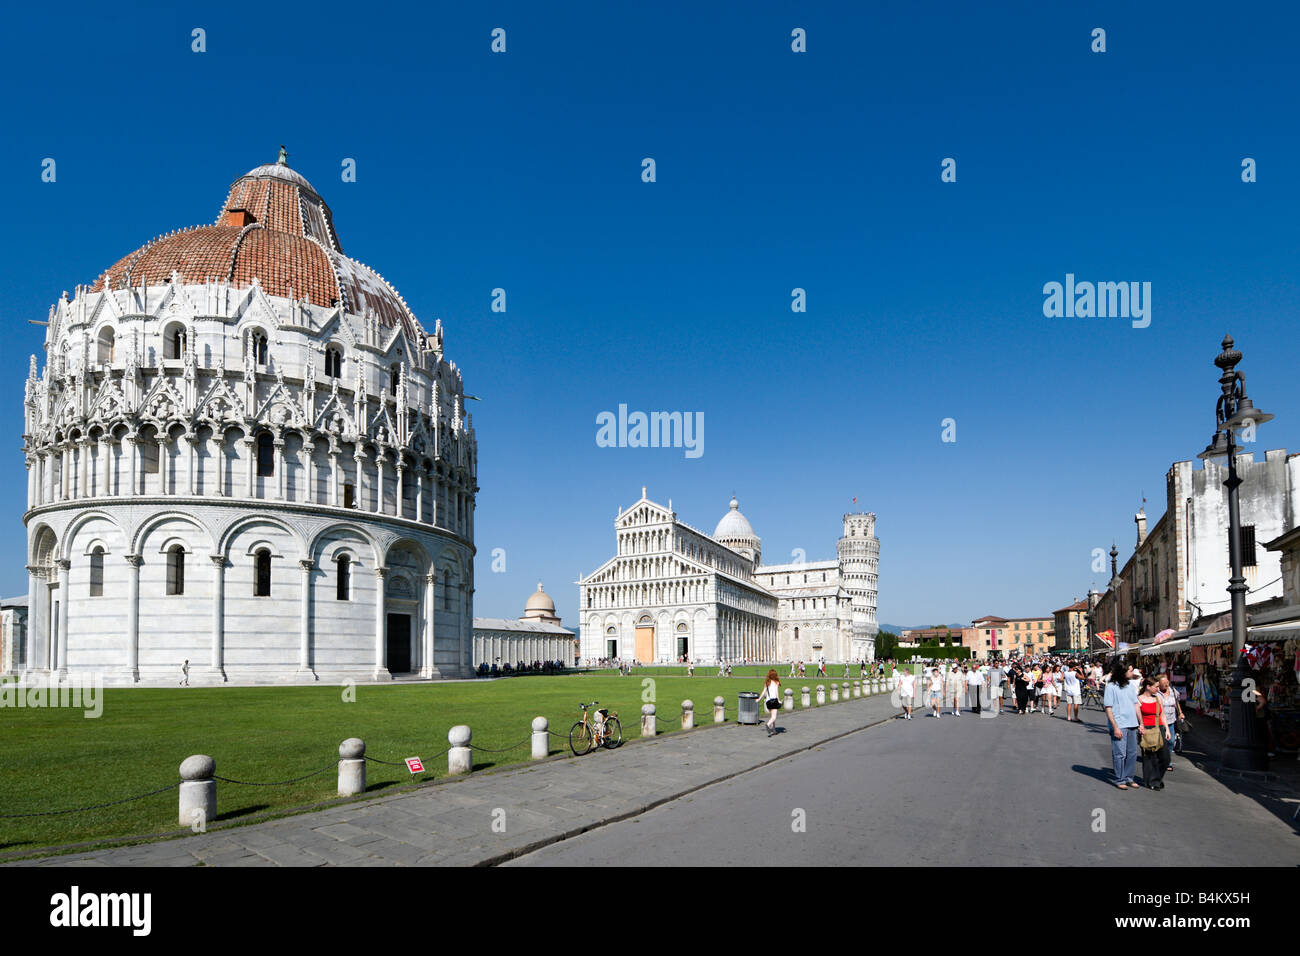 The Baptistry, Duomo and Leaning Tower, Piazza dei Miracoli, Pisa, Tuscany, Italy Stock Photo